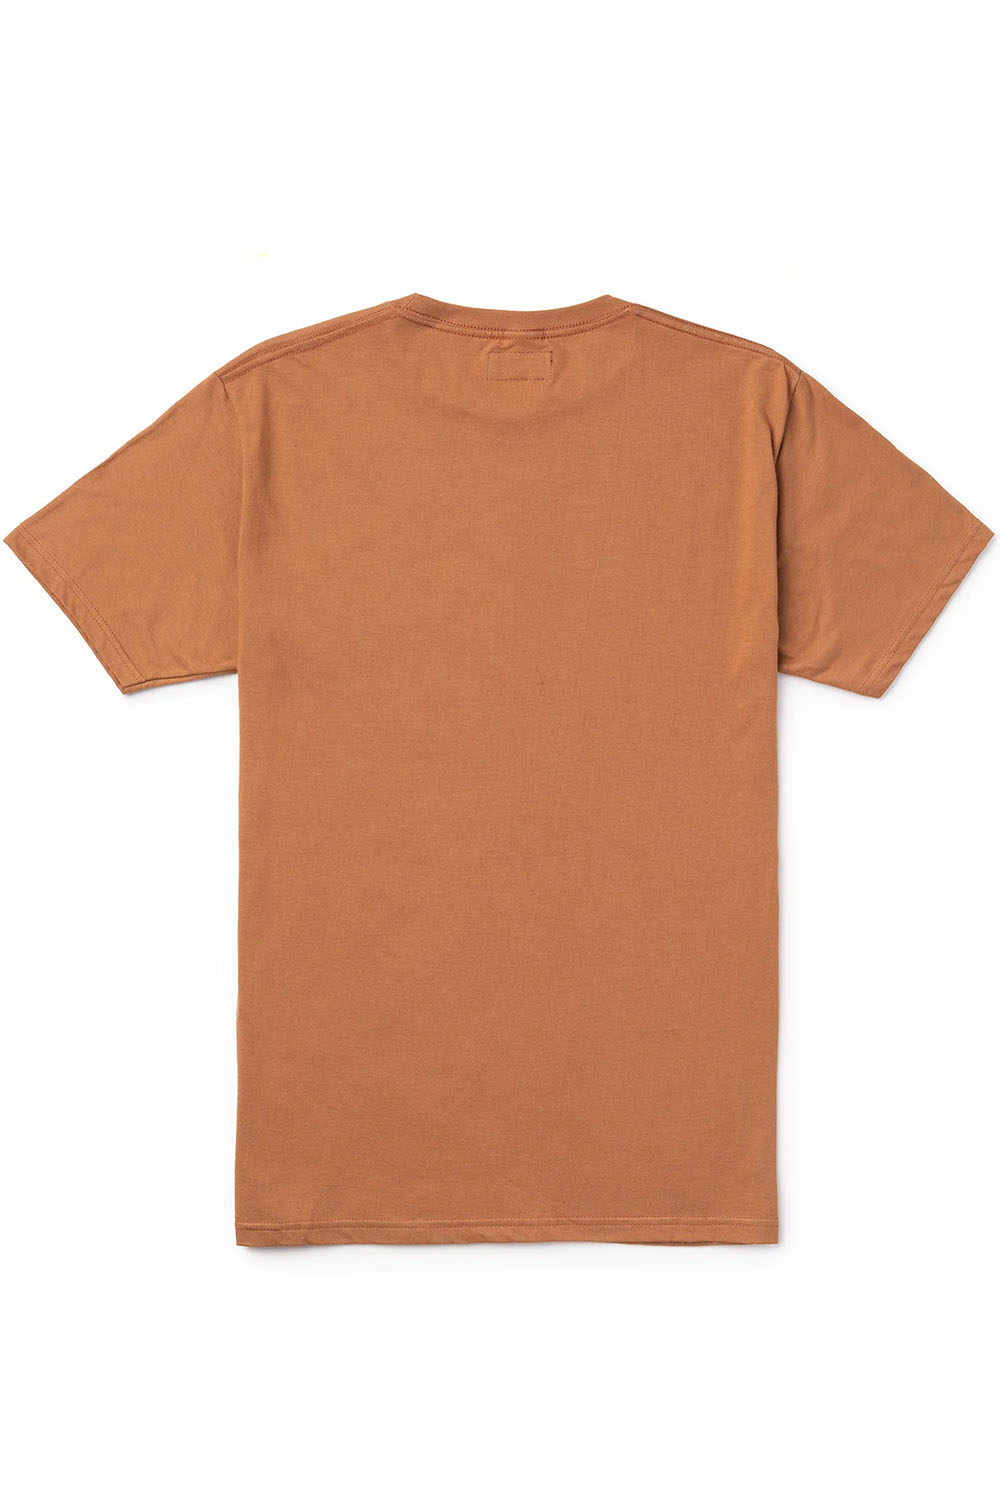 Seager - Heritage Tee - Brown - Back